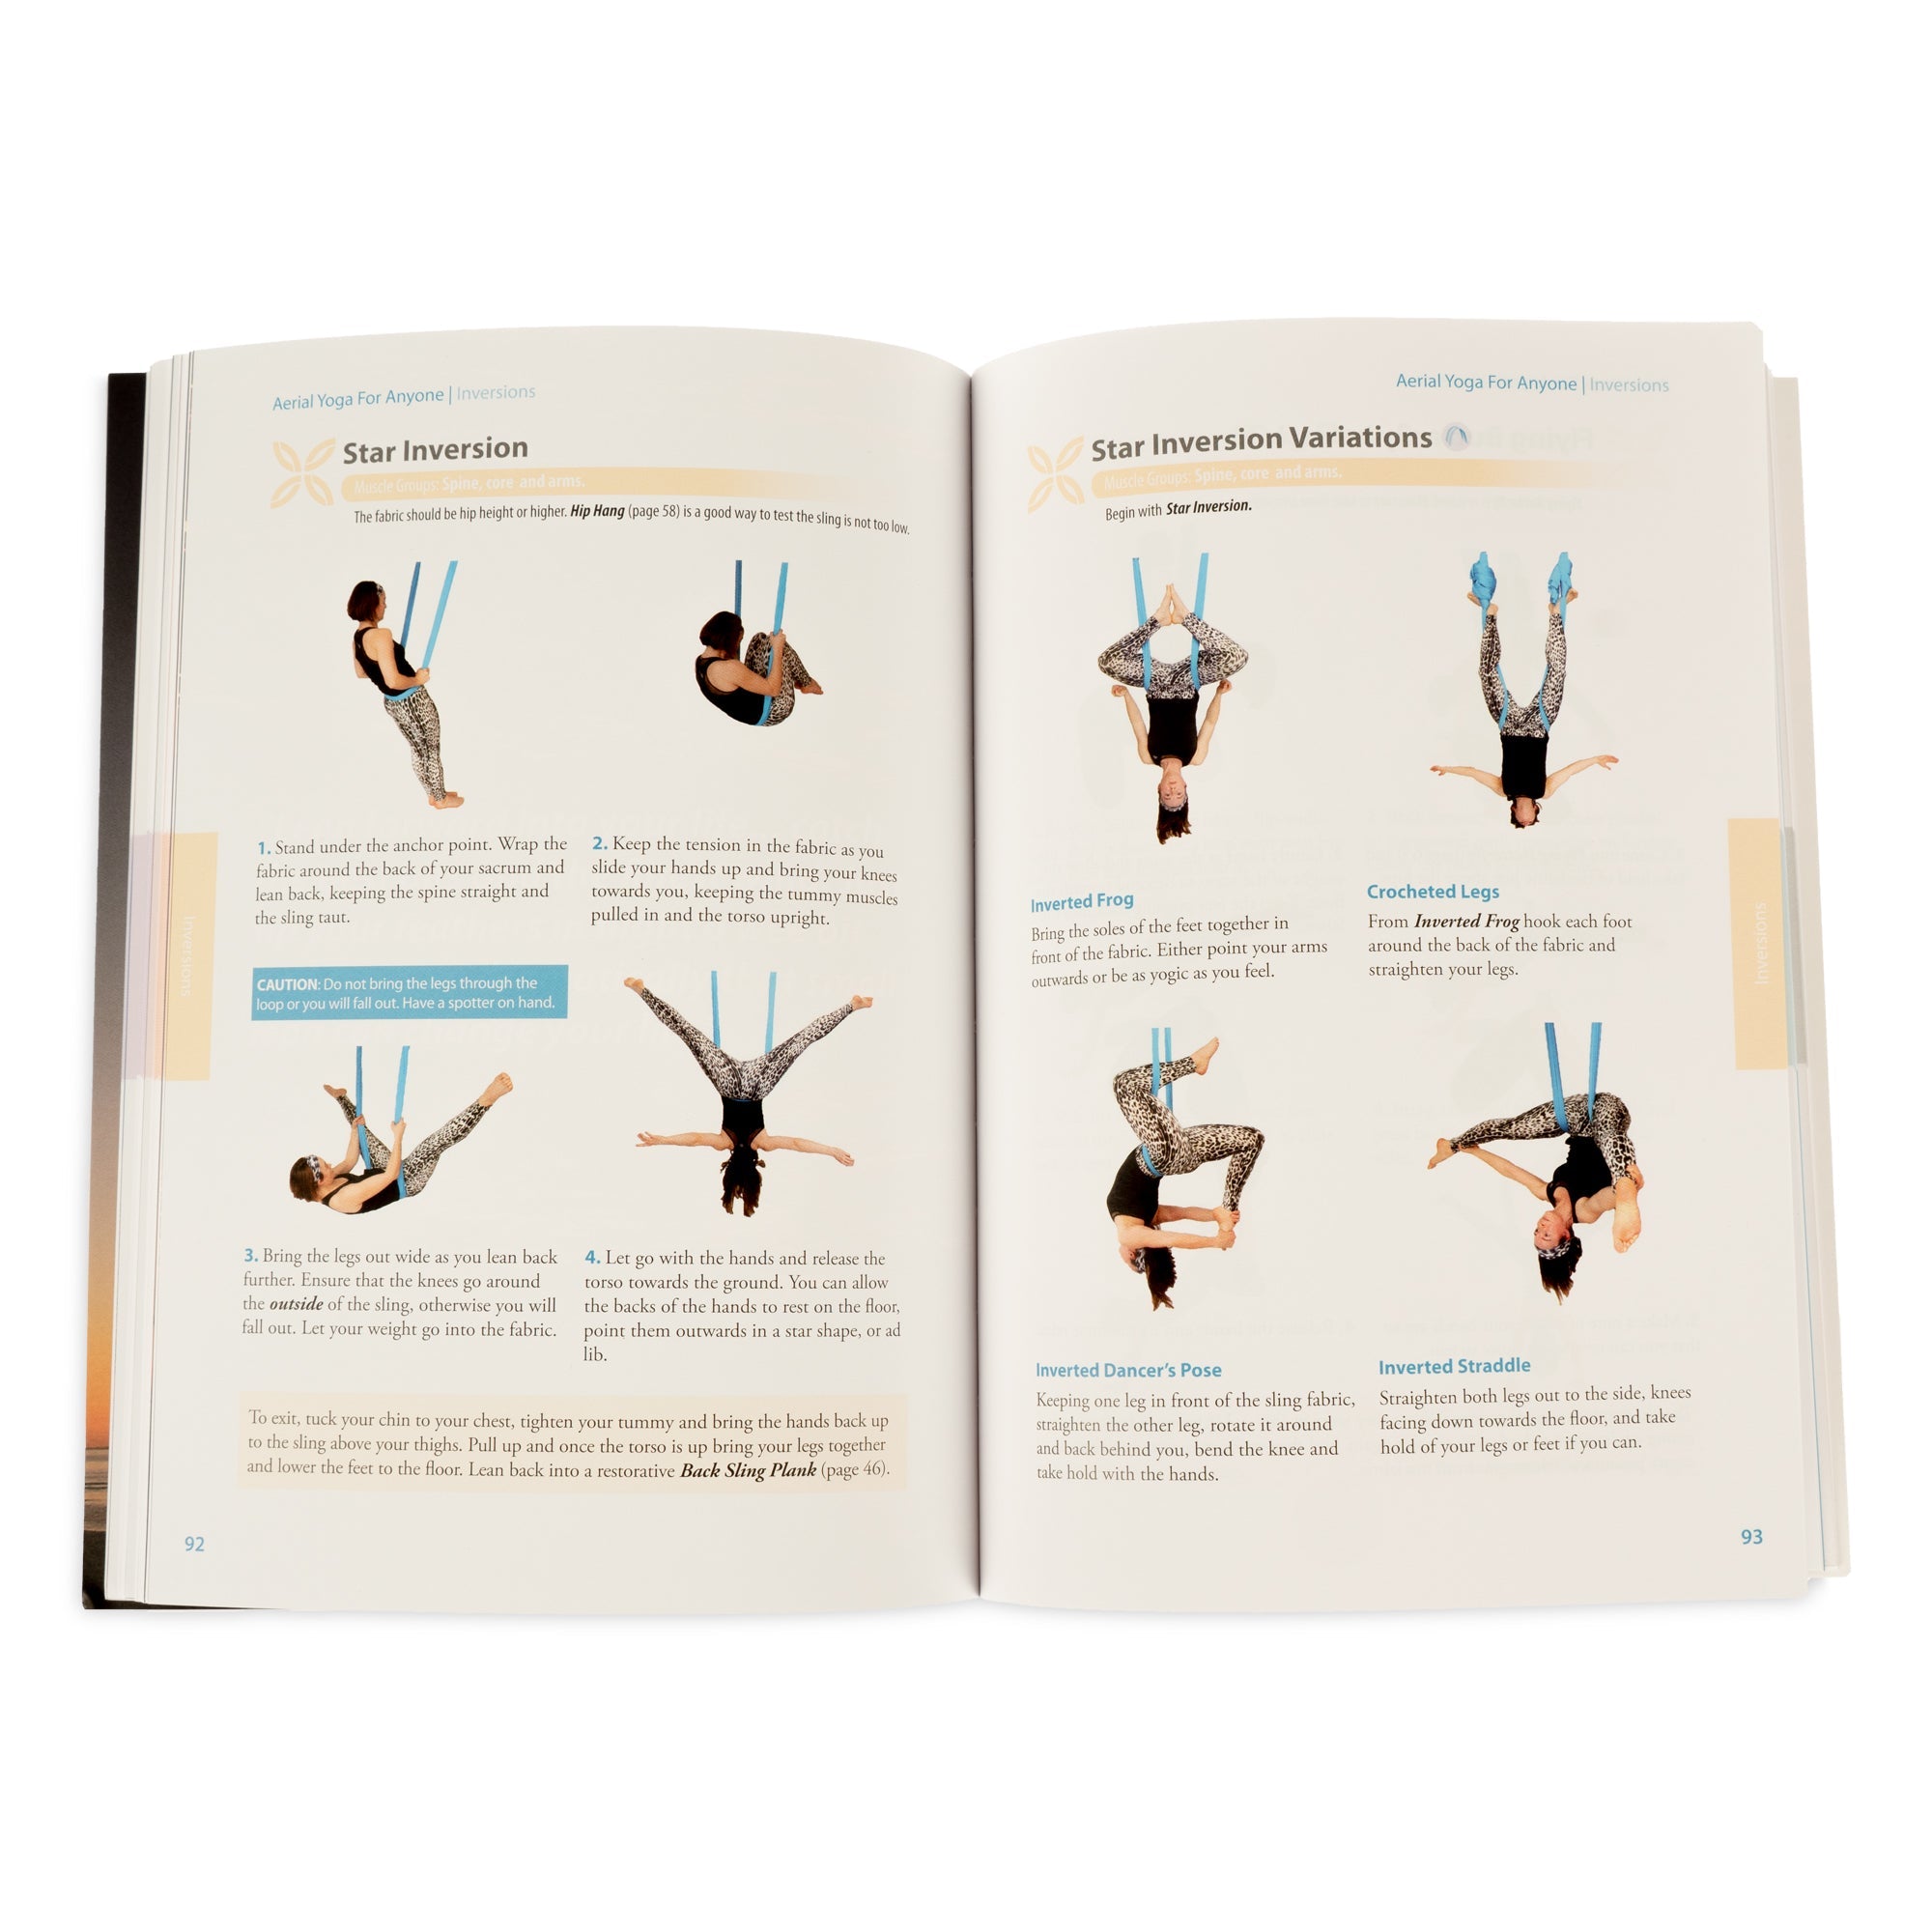 Images demonstrating different yoga inversions